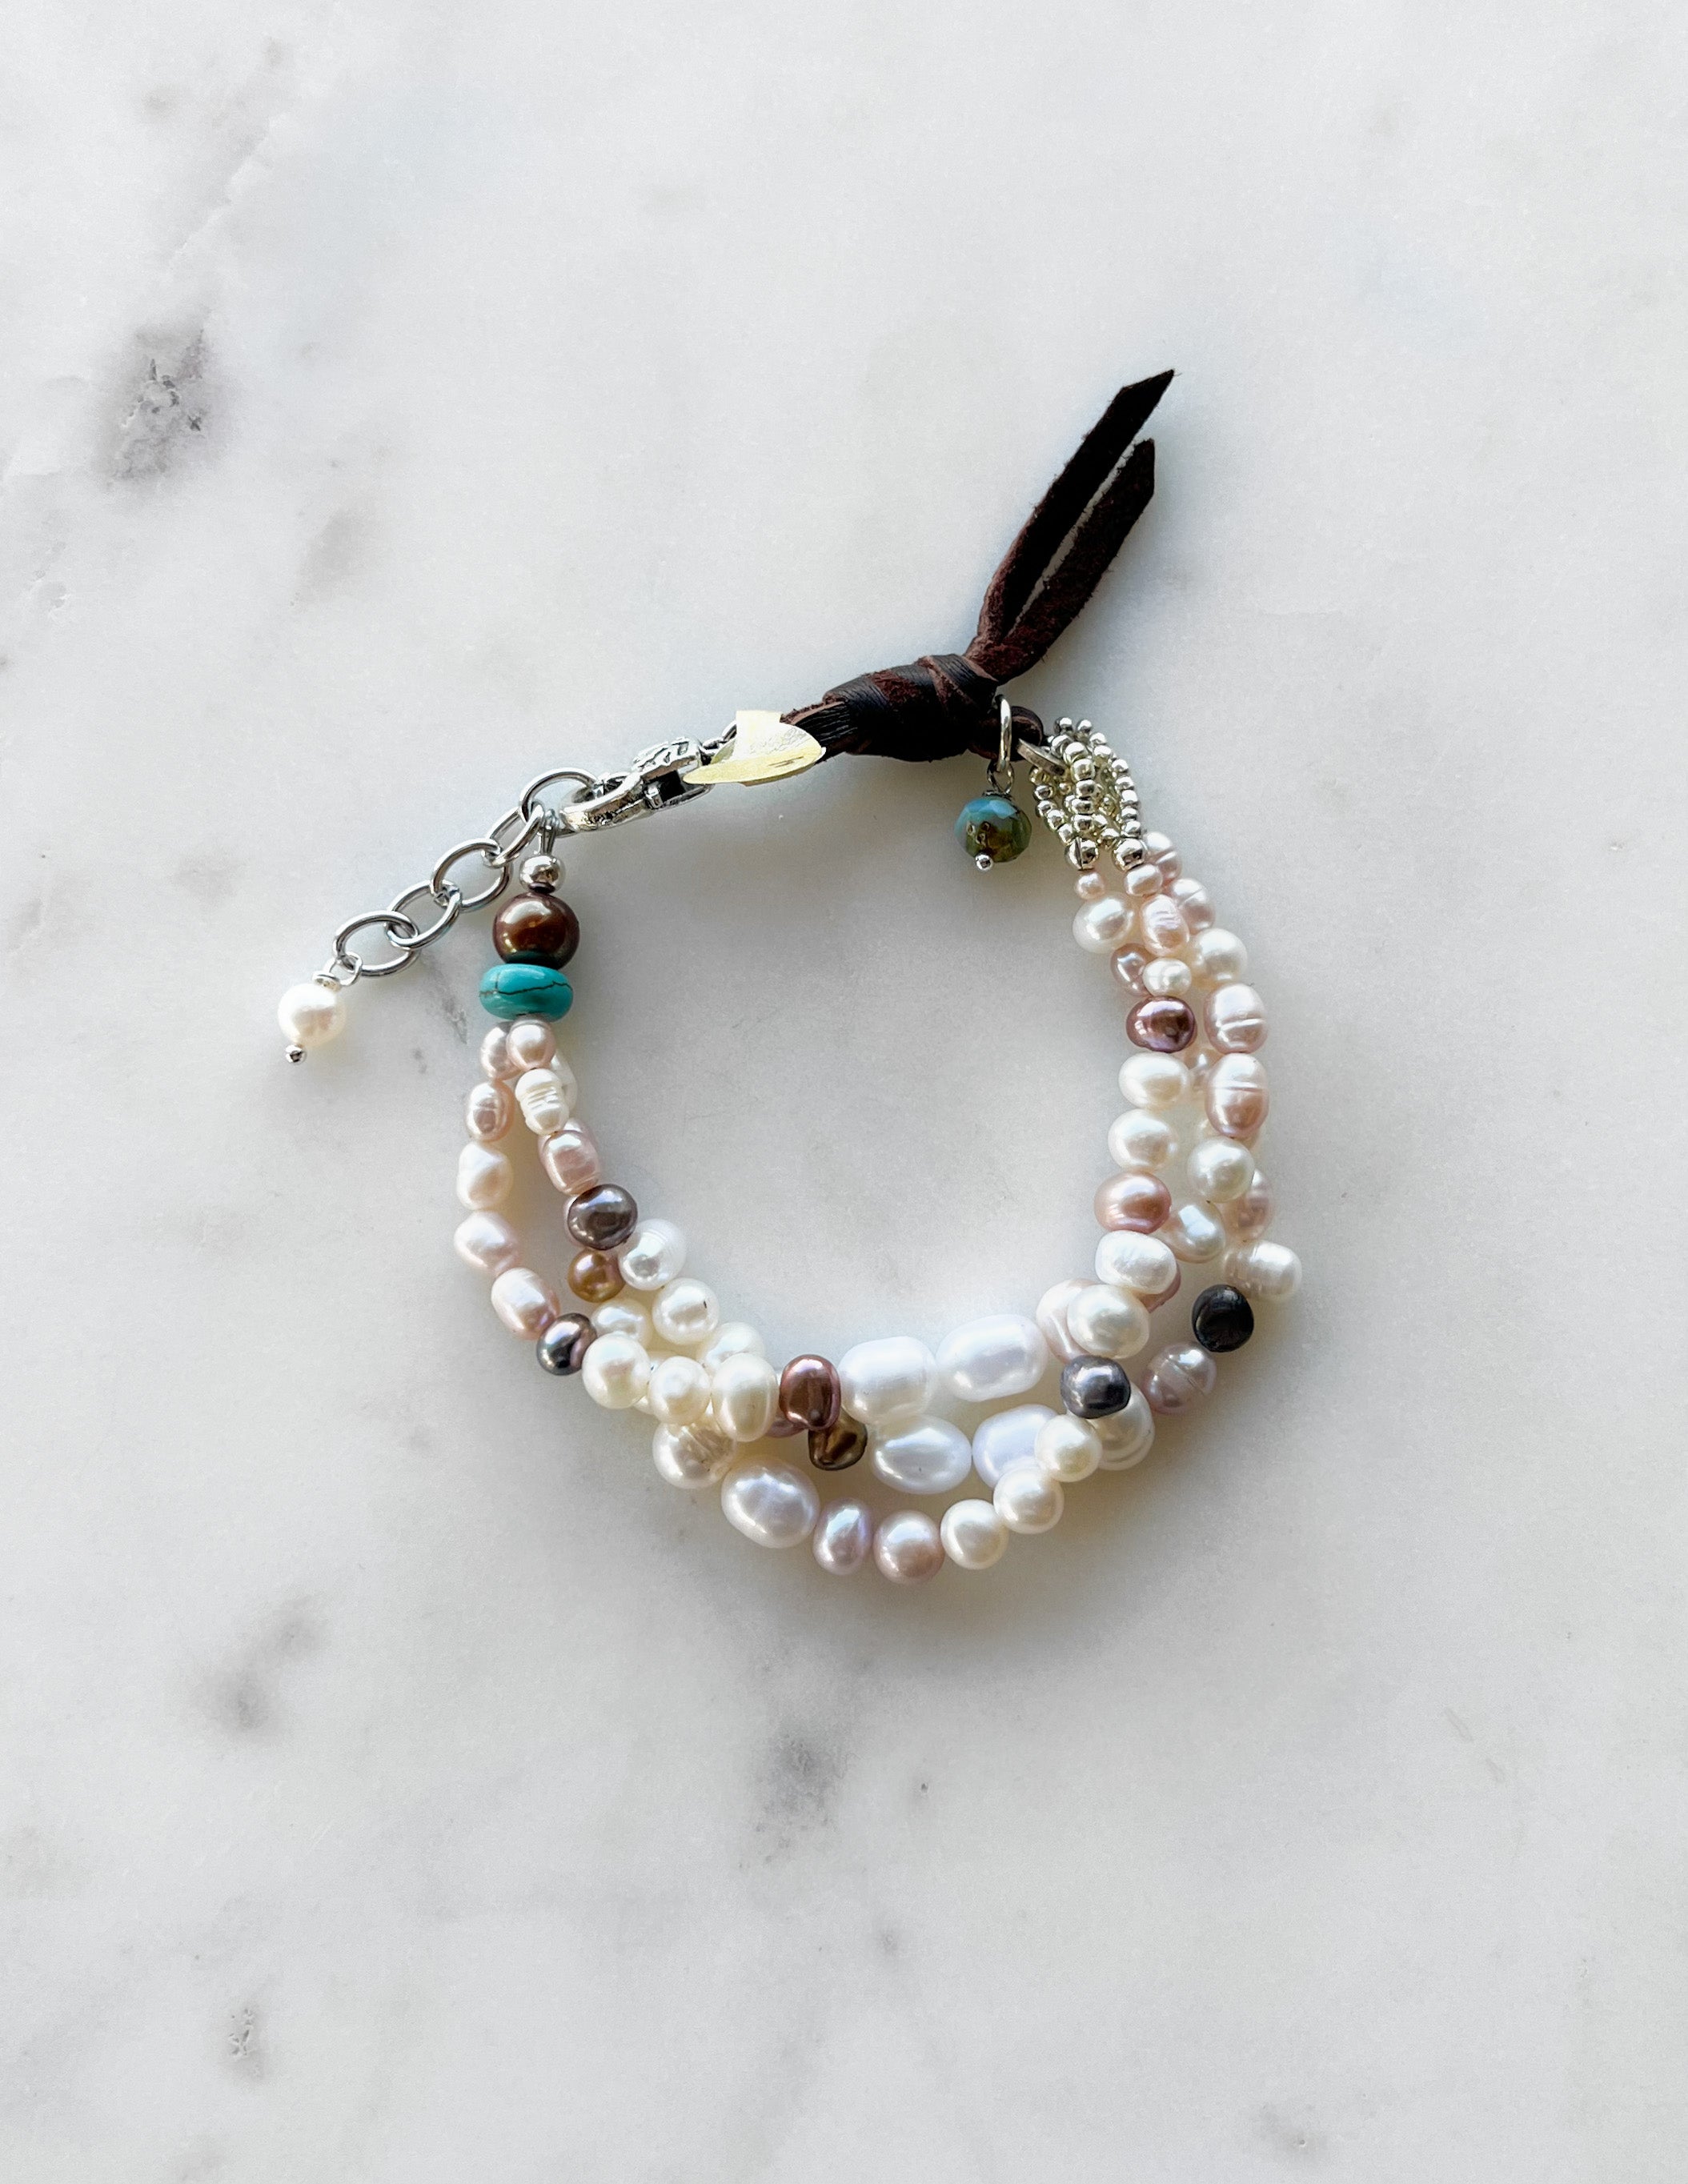 Pearls and Suede Bracelet